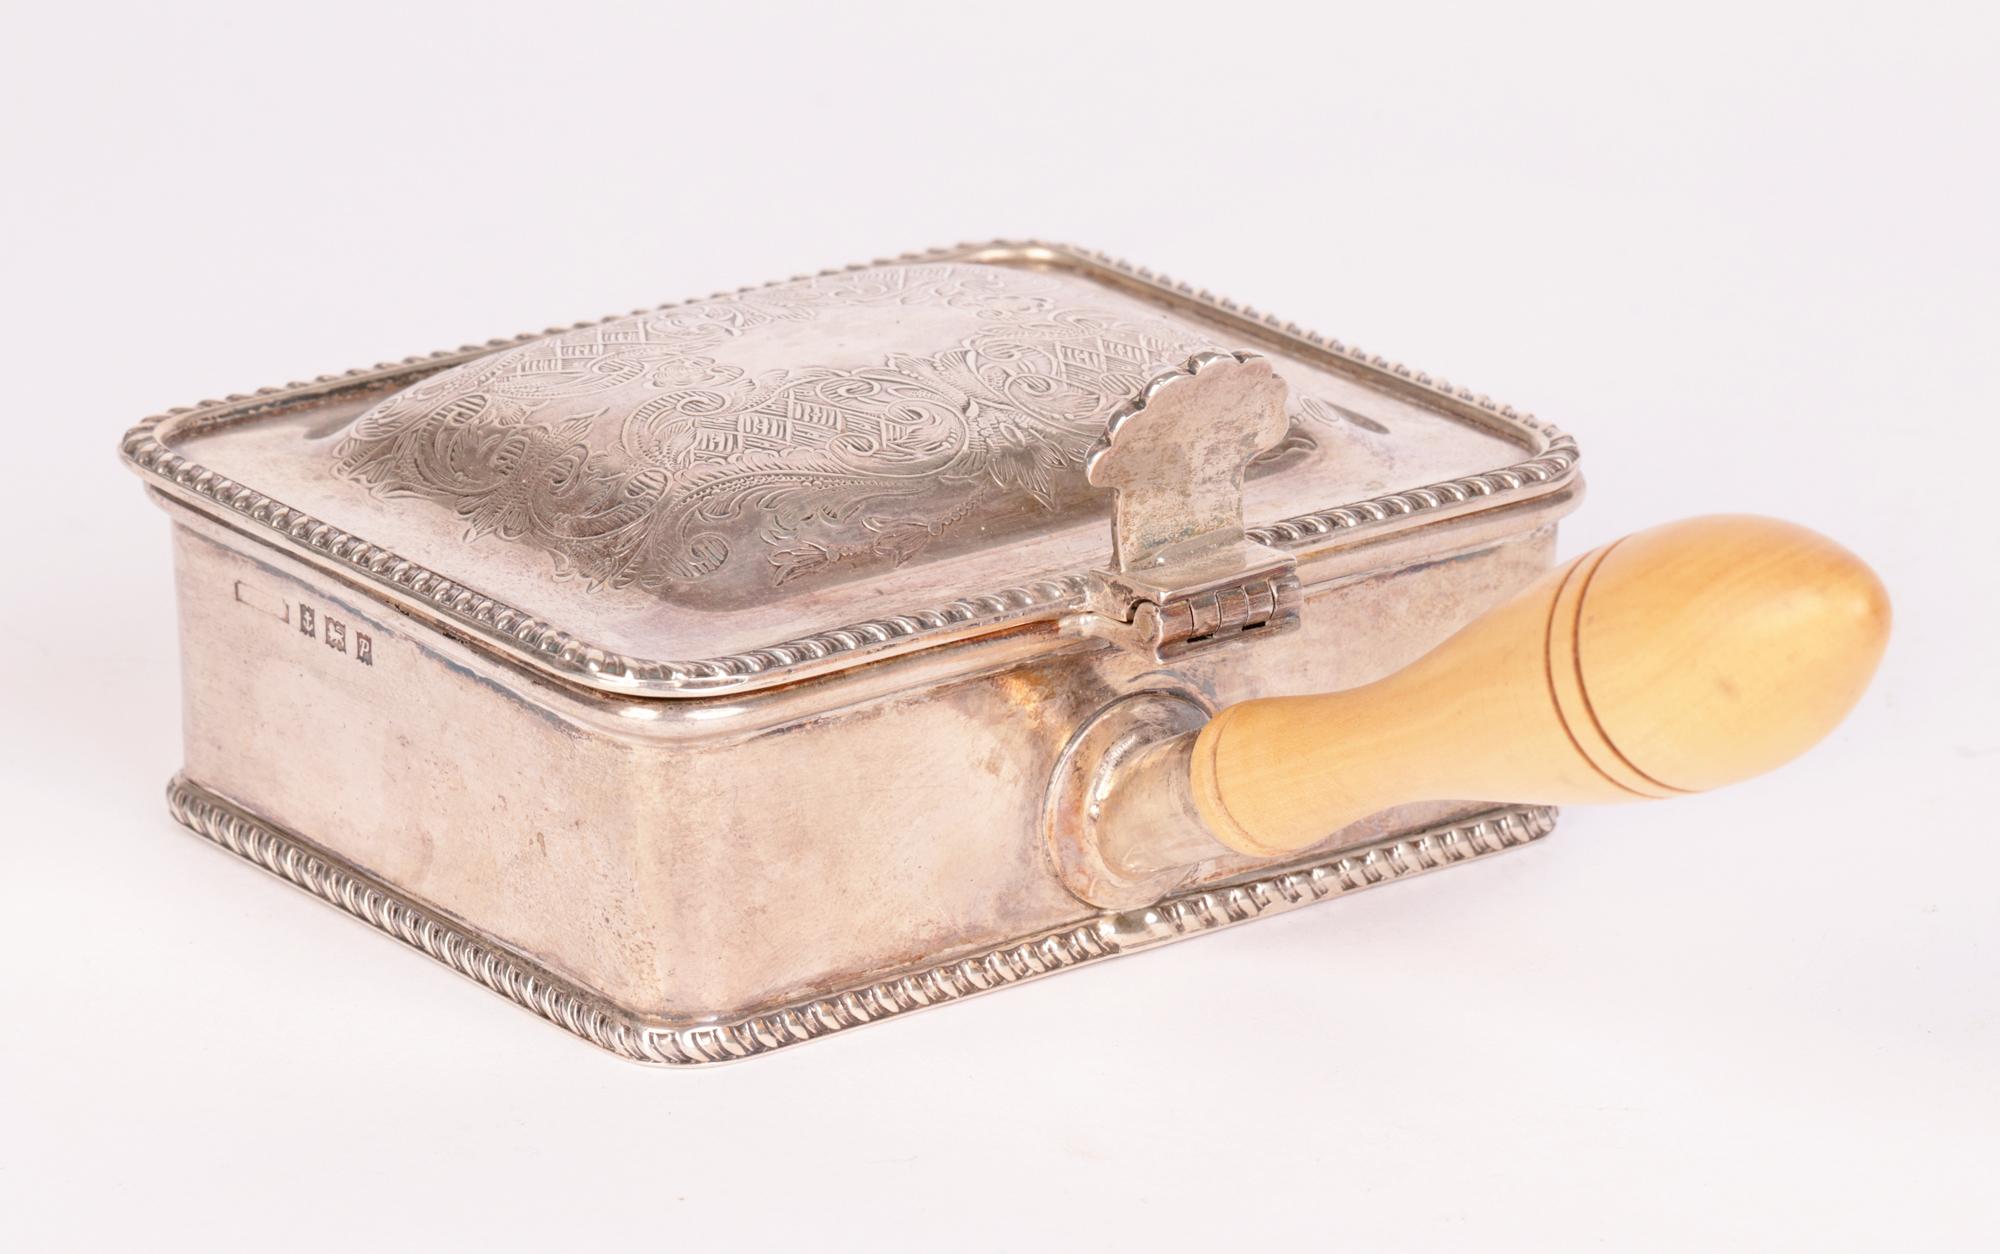 Continental Dutch Wood Handled Silver Ashtray or Cheroot Holder In Good Condition For Sale In Bishop's Stortford, Hertfordshire